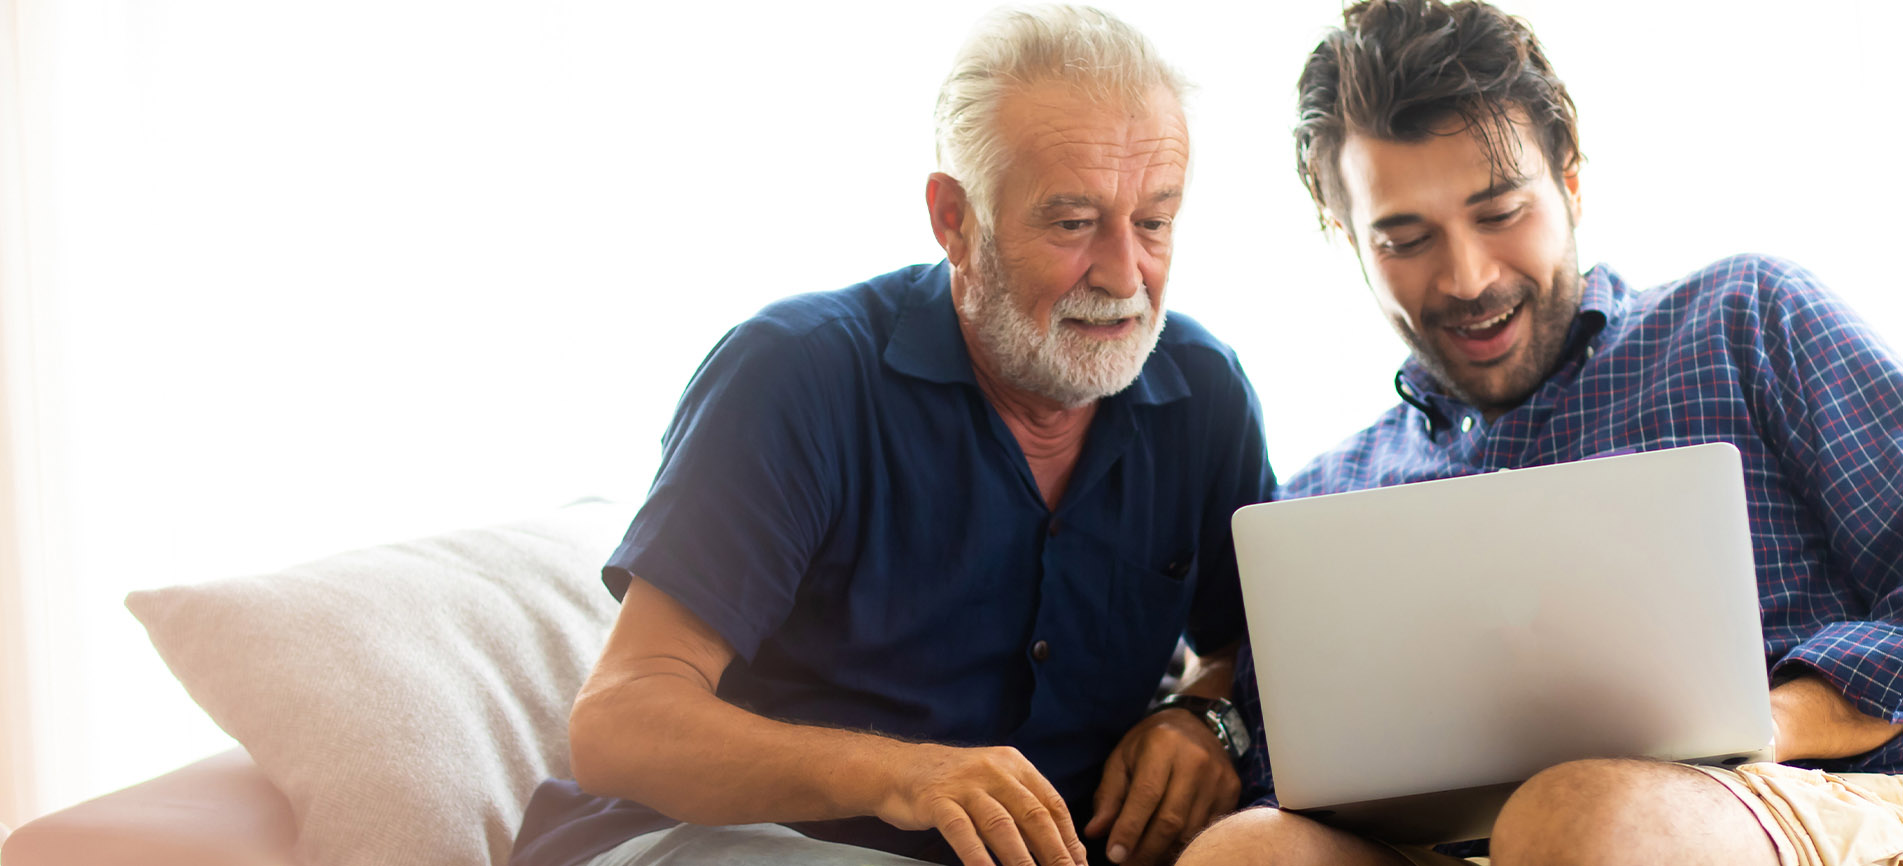 A father and son excitedly work at a laptop computer, sitting on a couch against a bright background.